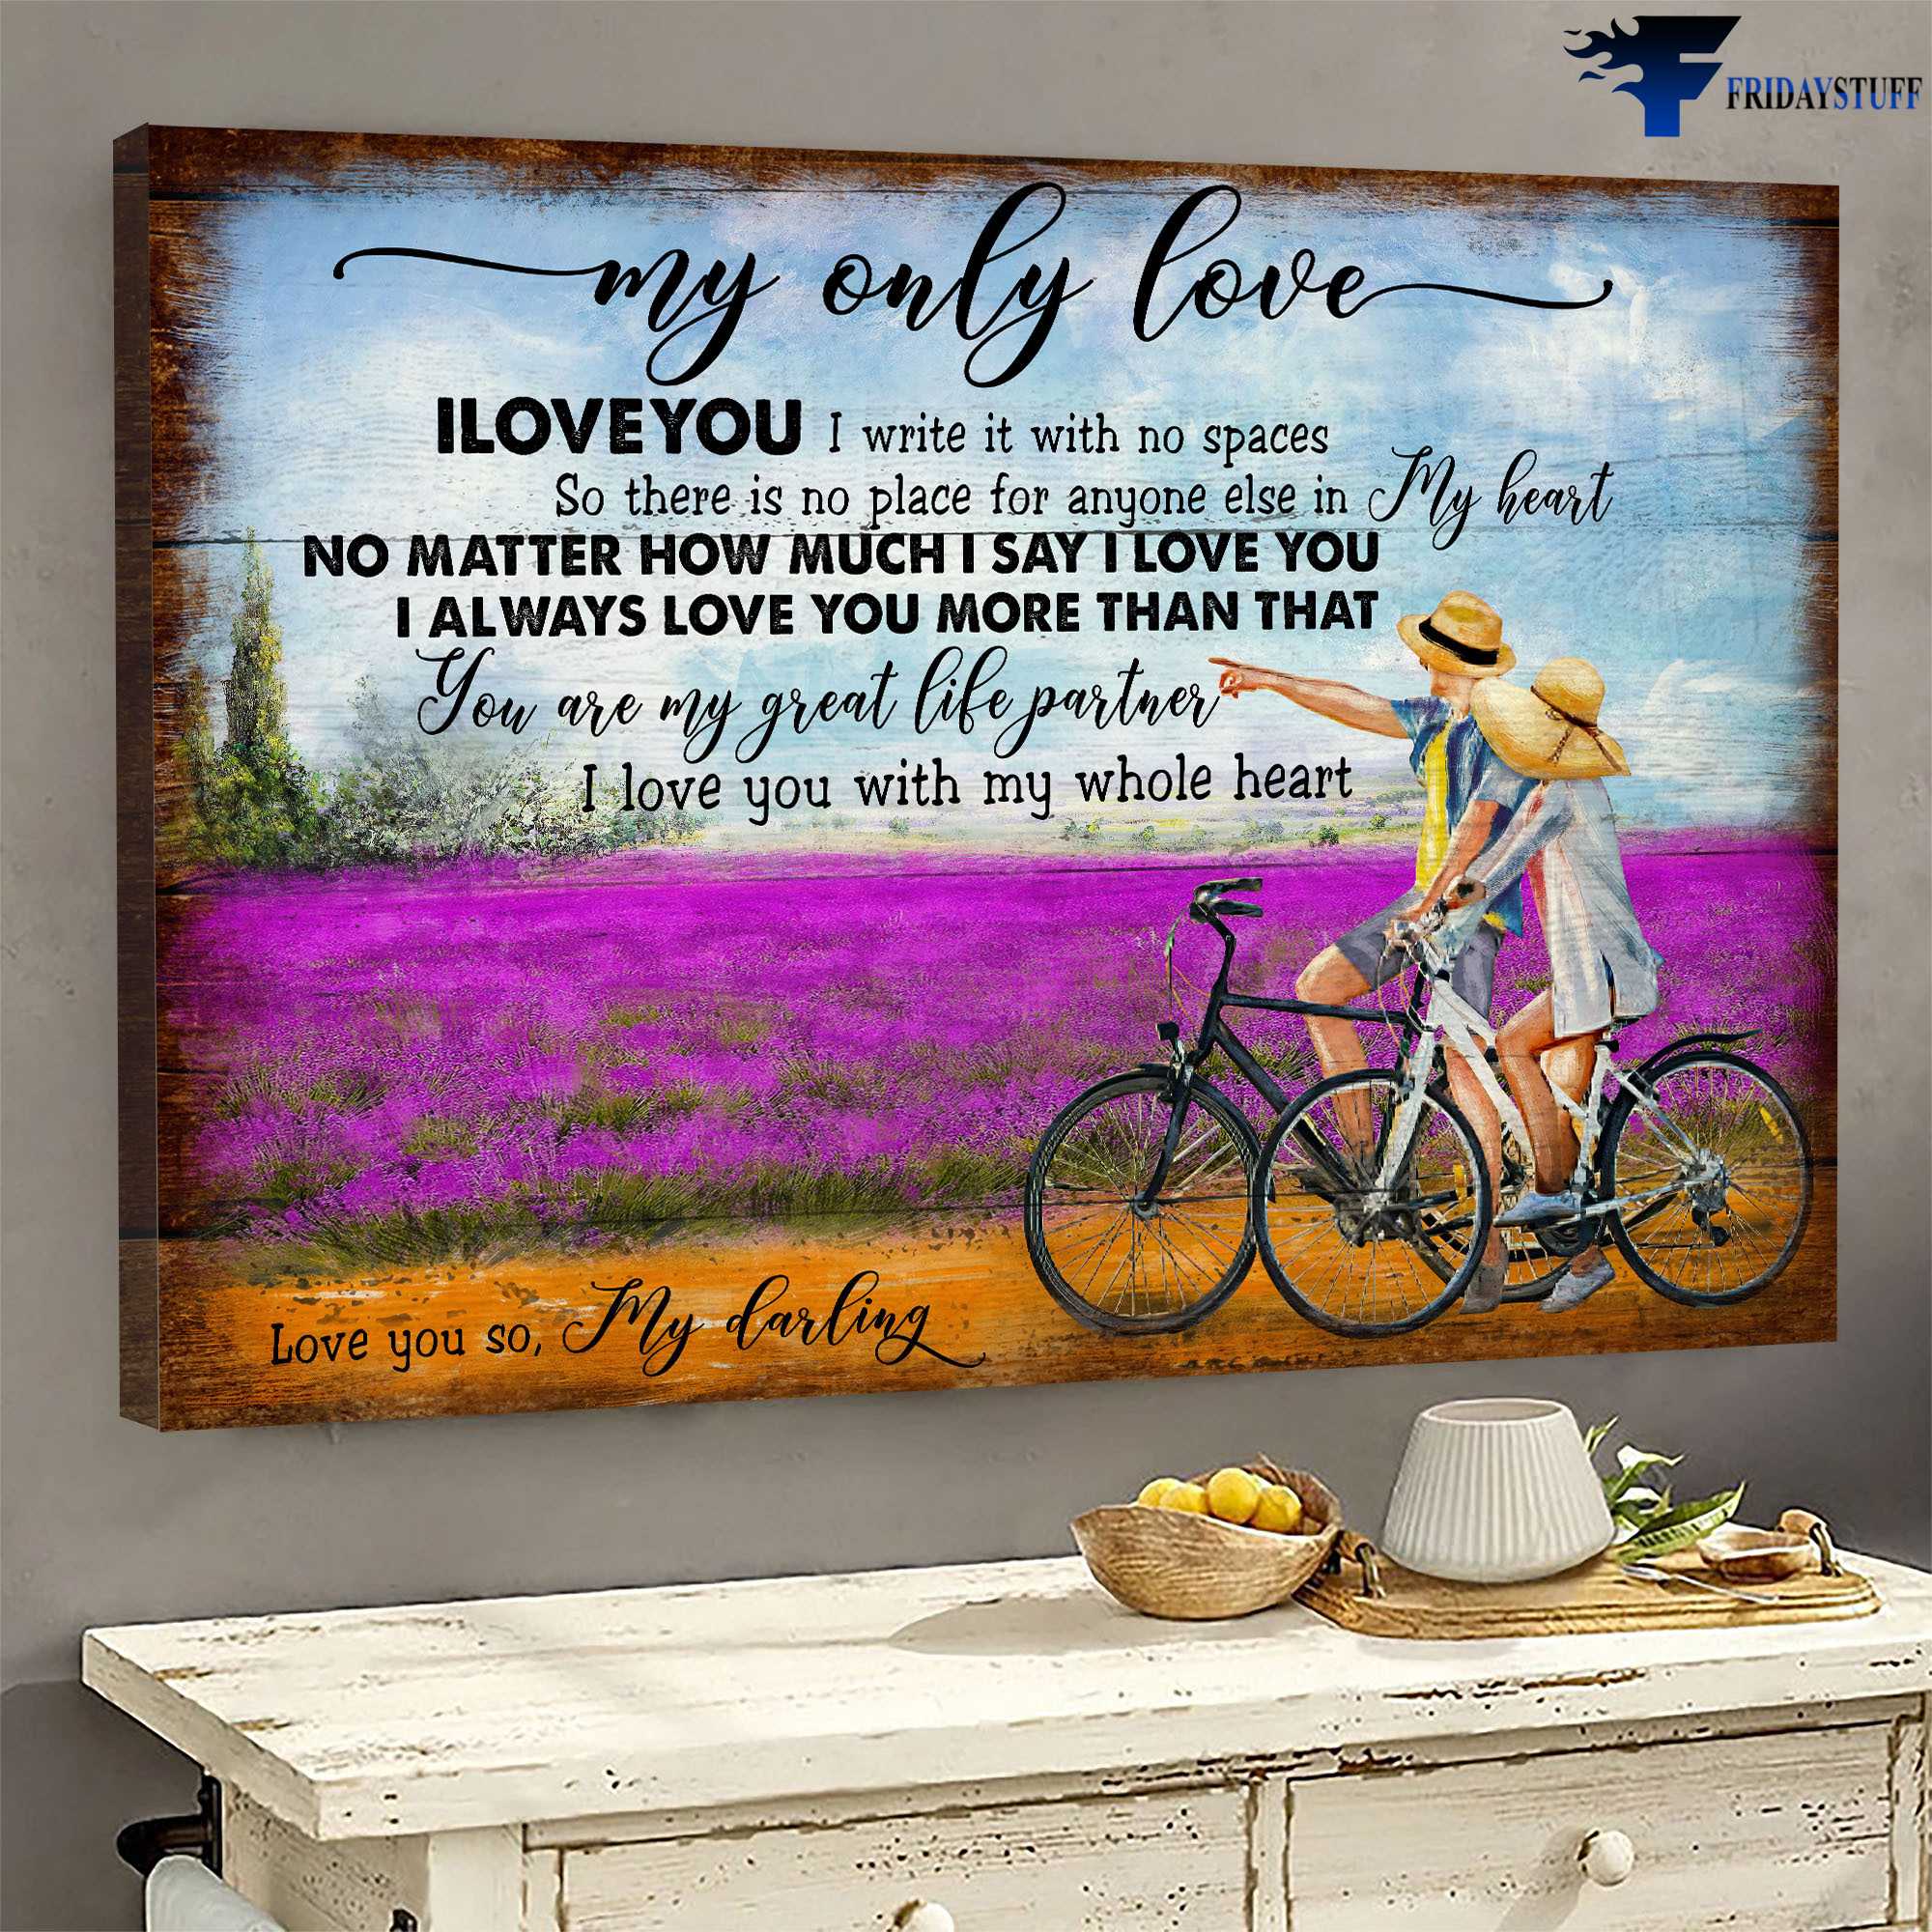 Couple Cycling, Lavender Field - My Only Love, I Love You, I Write It With No Spaces, So There Is No Place For Anyone Else, In My Beart, No Matter How Much I Say, I Love You